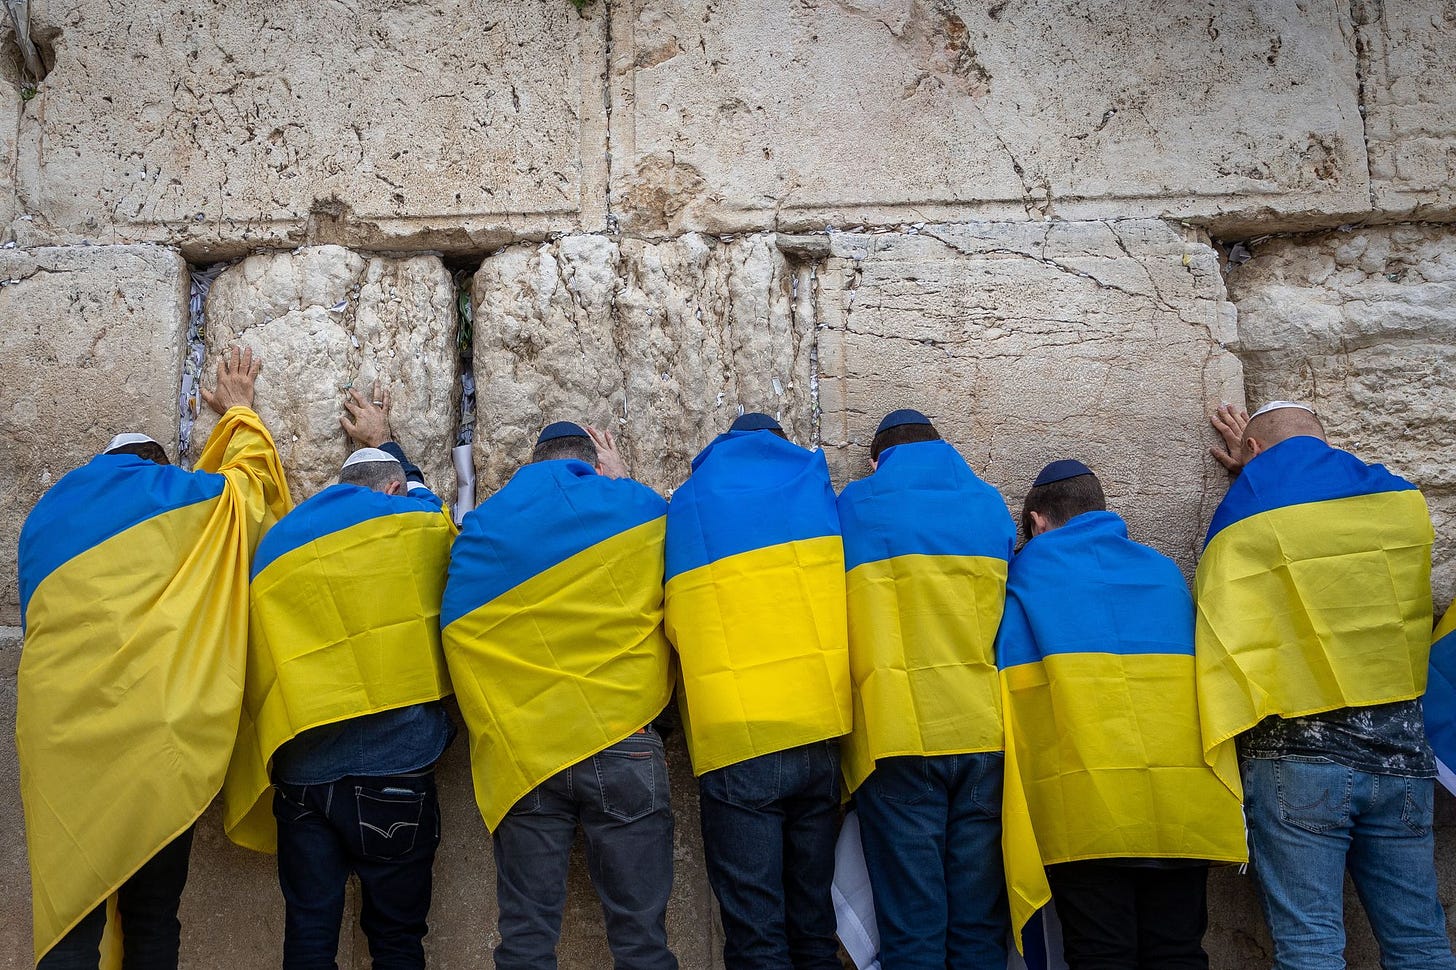 Ukraine's ambassador to Israel, Yevgen Korniychuk, Ukrainian citizens and supporters attend a special prayer for the Ukrainian people organized by businessman Arie Schwartz at the Western Wall in Jerusalem's Old City on March 2, 2022. (Photo by Yonatan Sindel/Flash90)